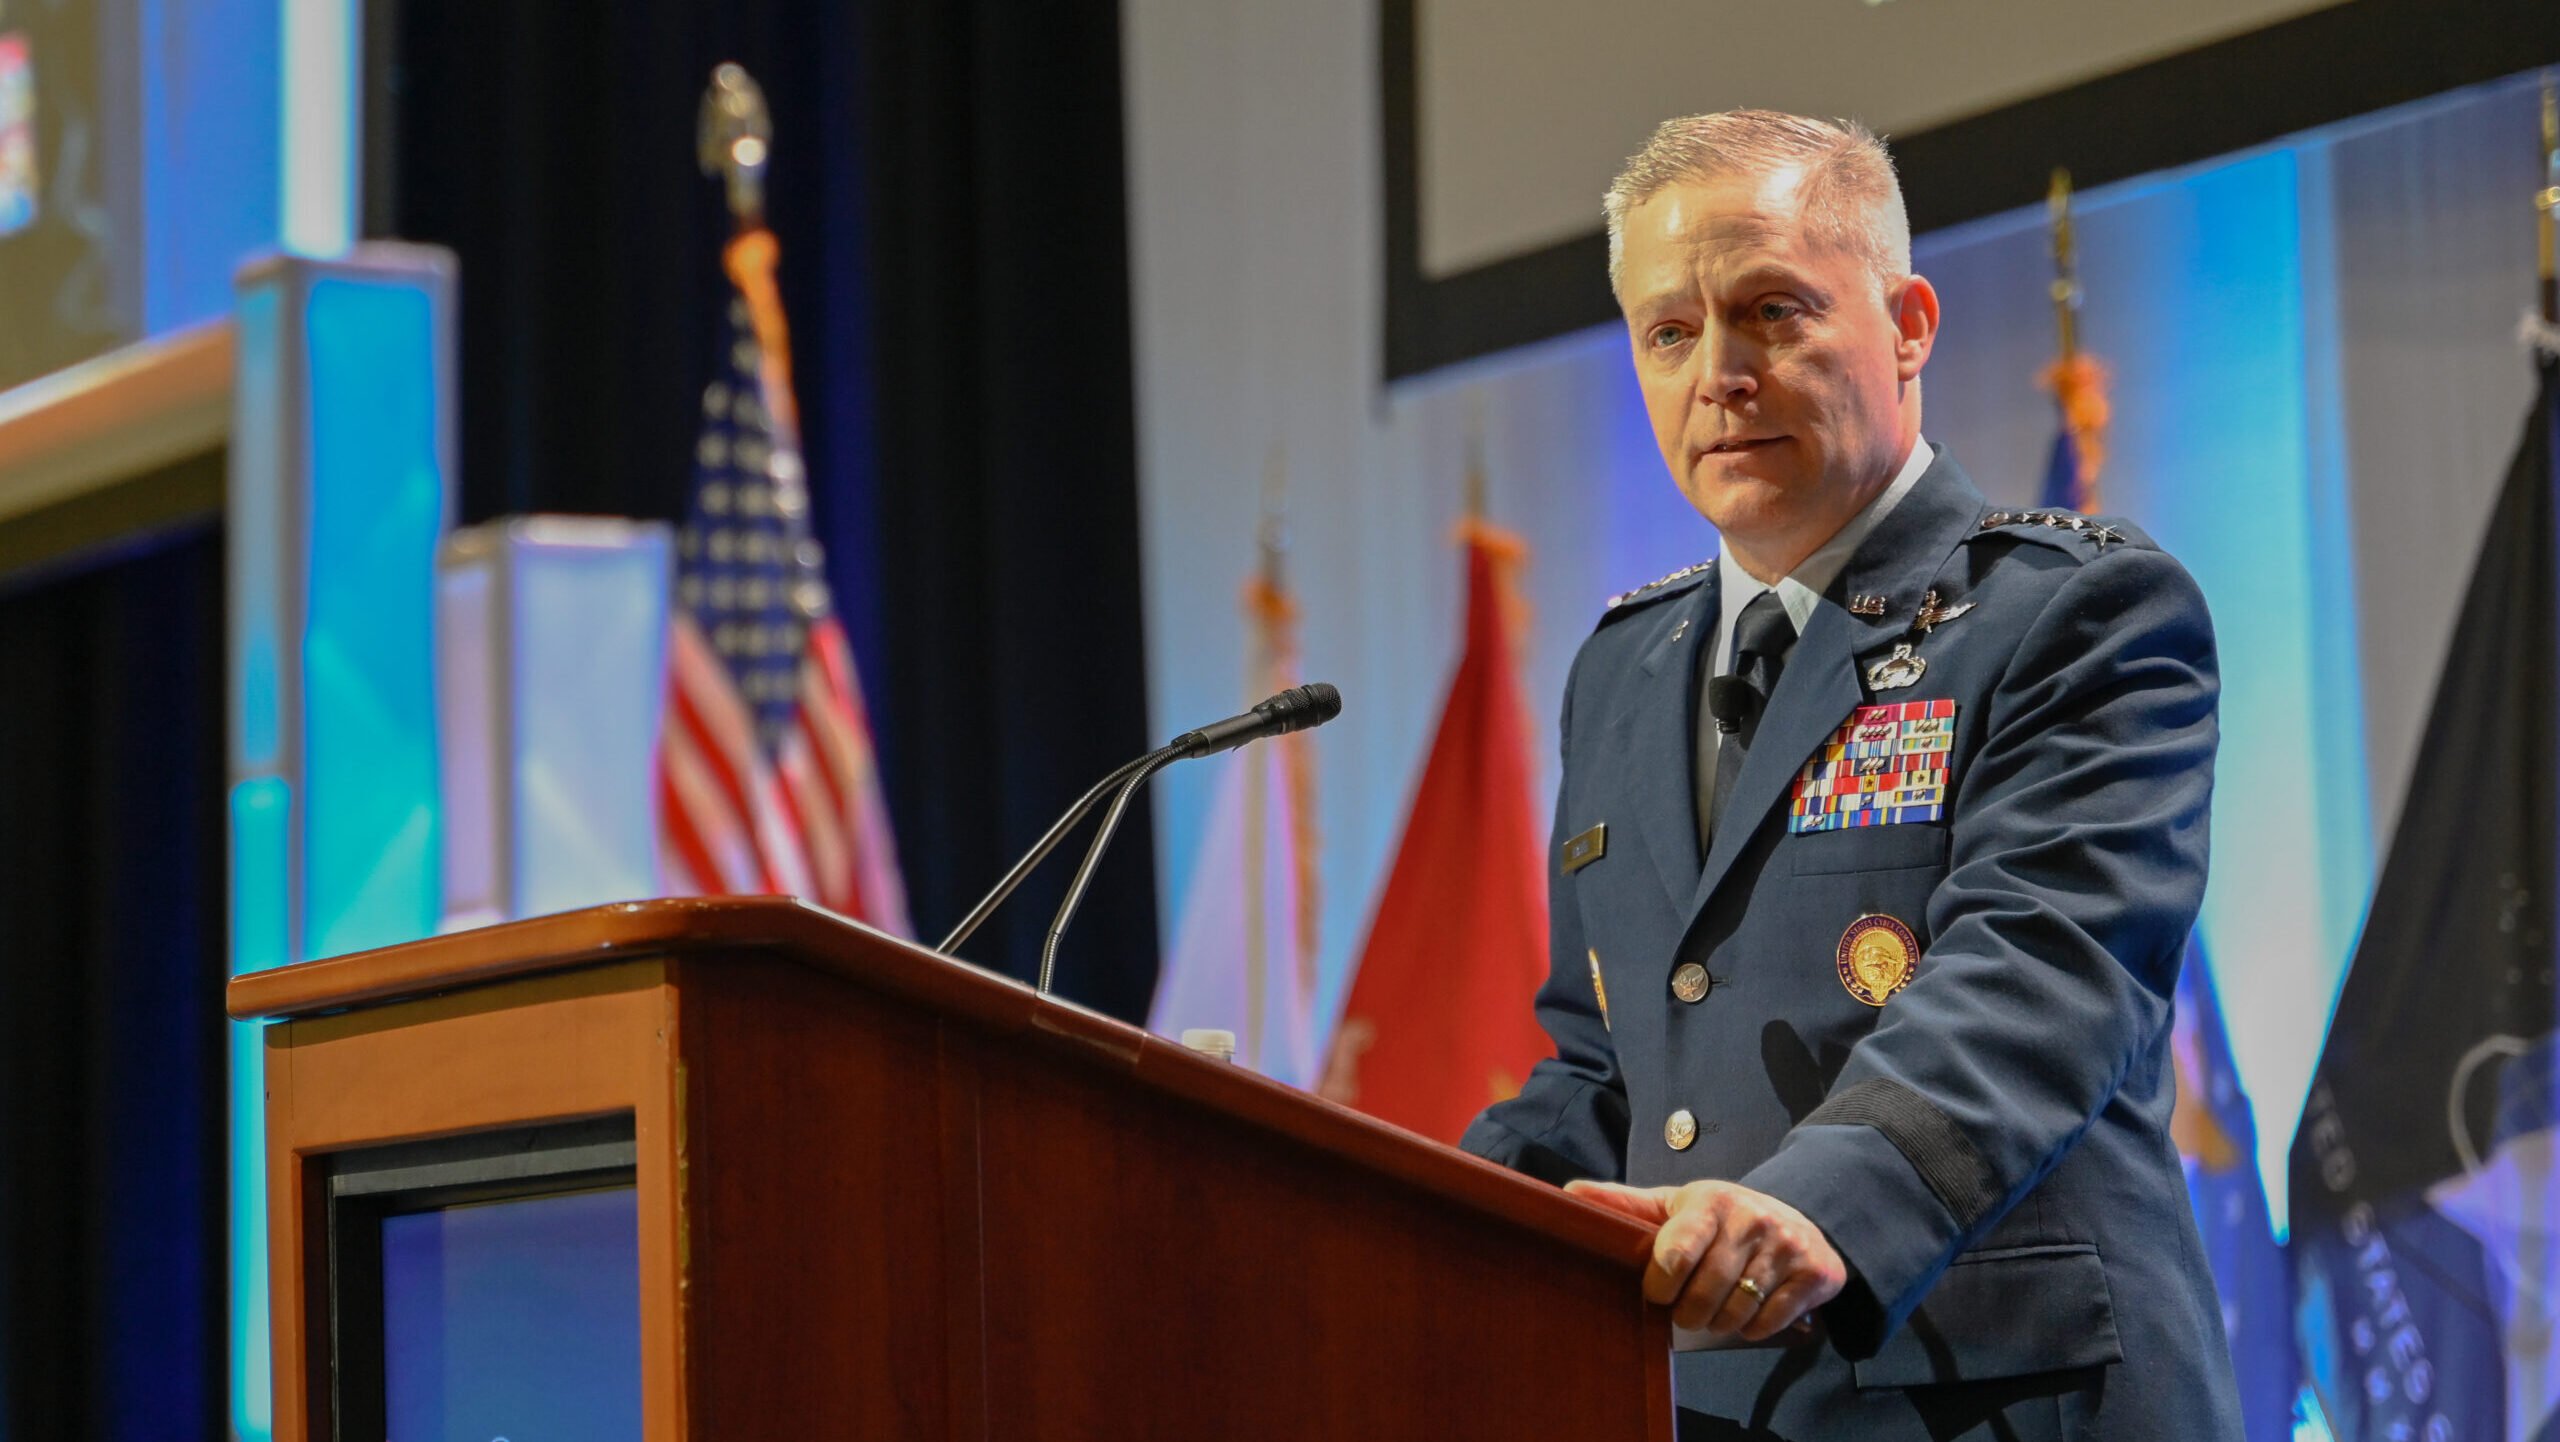 China ‘actively’ targeting US industrial base, warns CYBERCOM chief